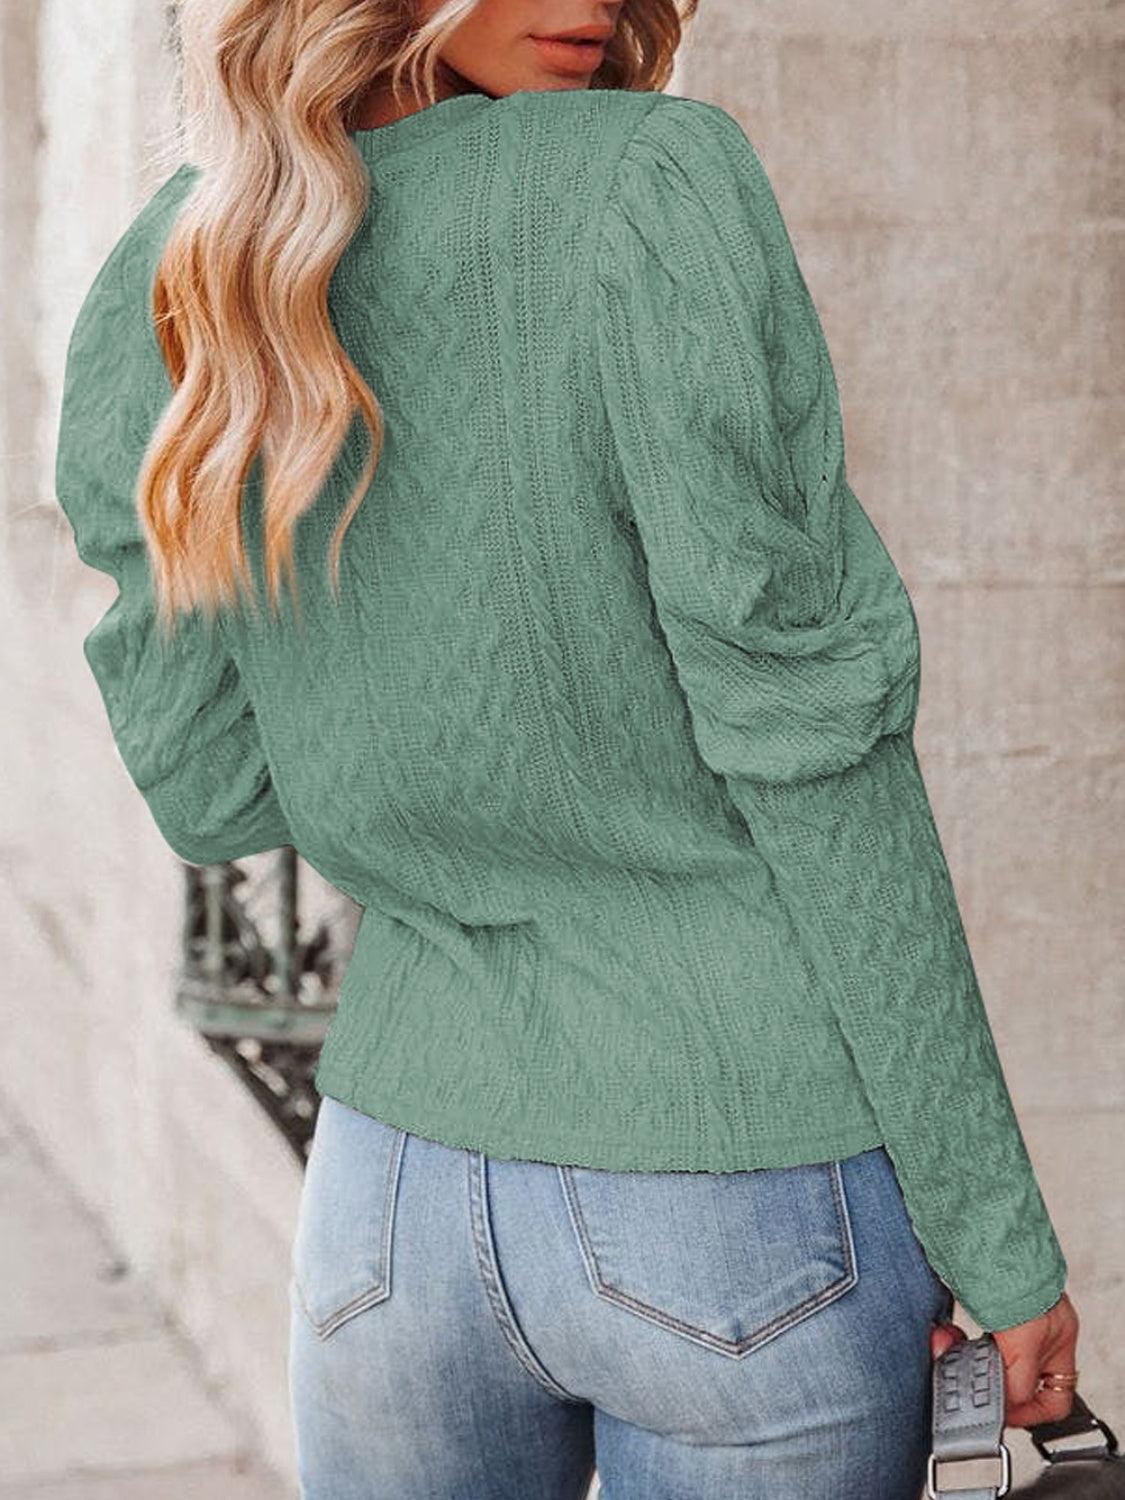 Puff Sleeve Knit Top in 5 Colors - Olive Ave